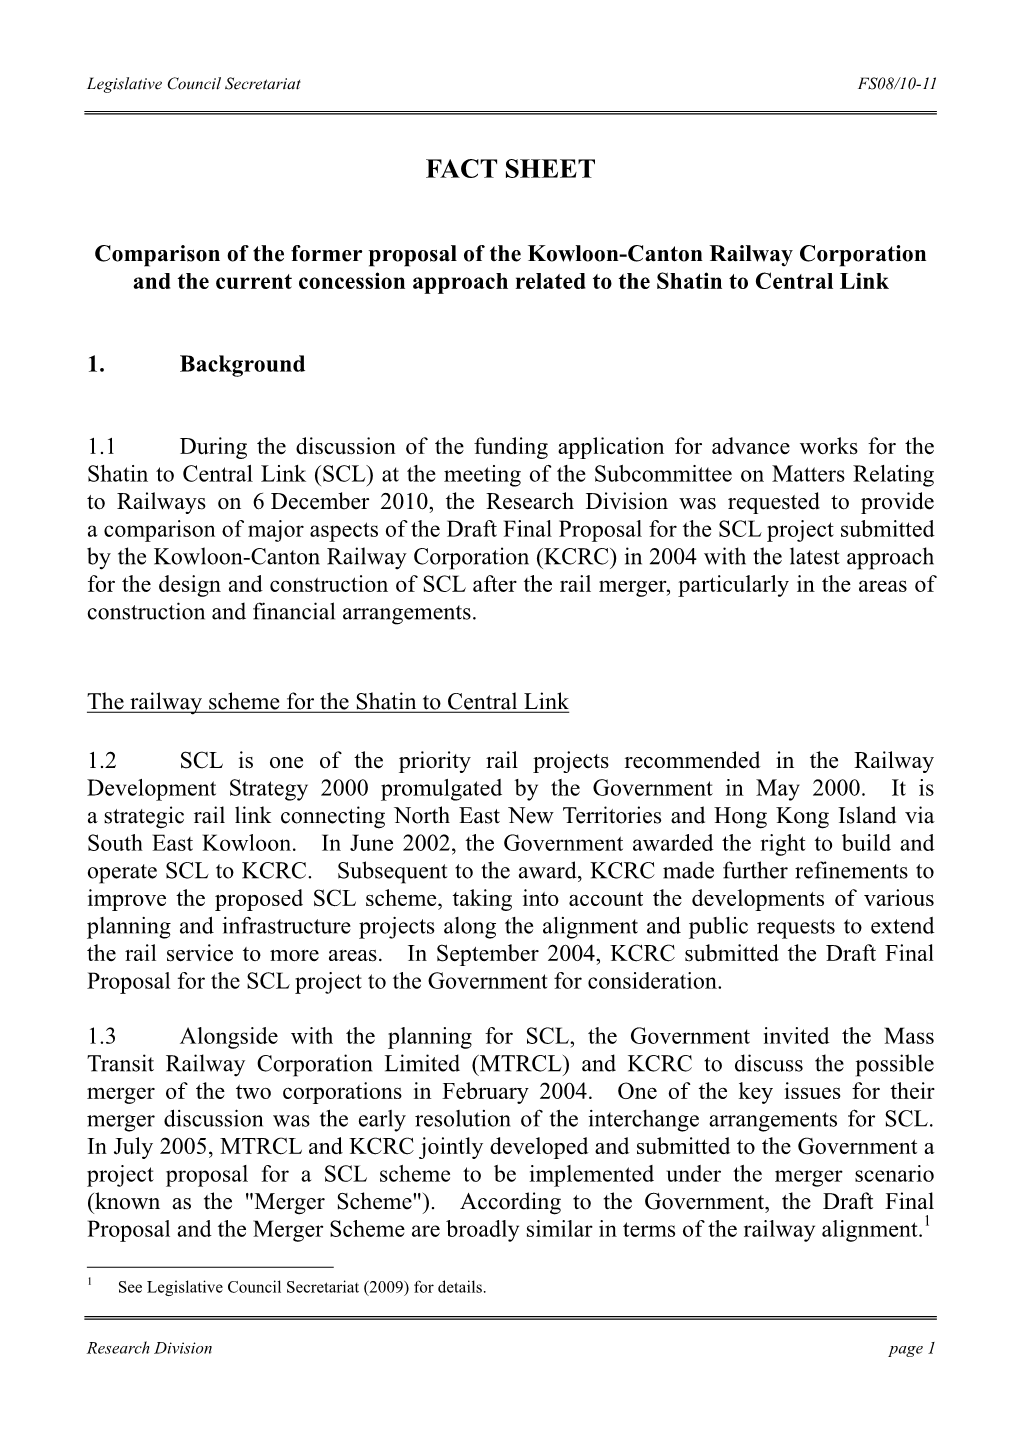 Fact Sheet on "Comparison of the Former Proposal of the Kowloon